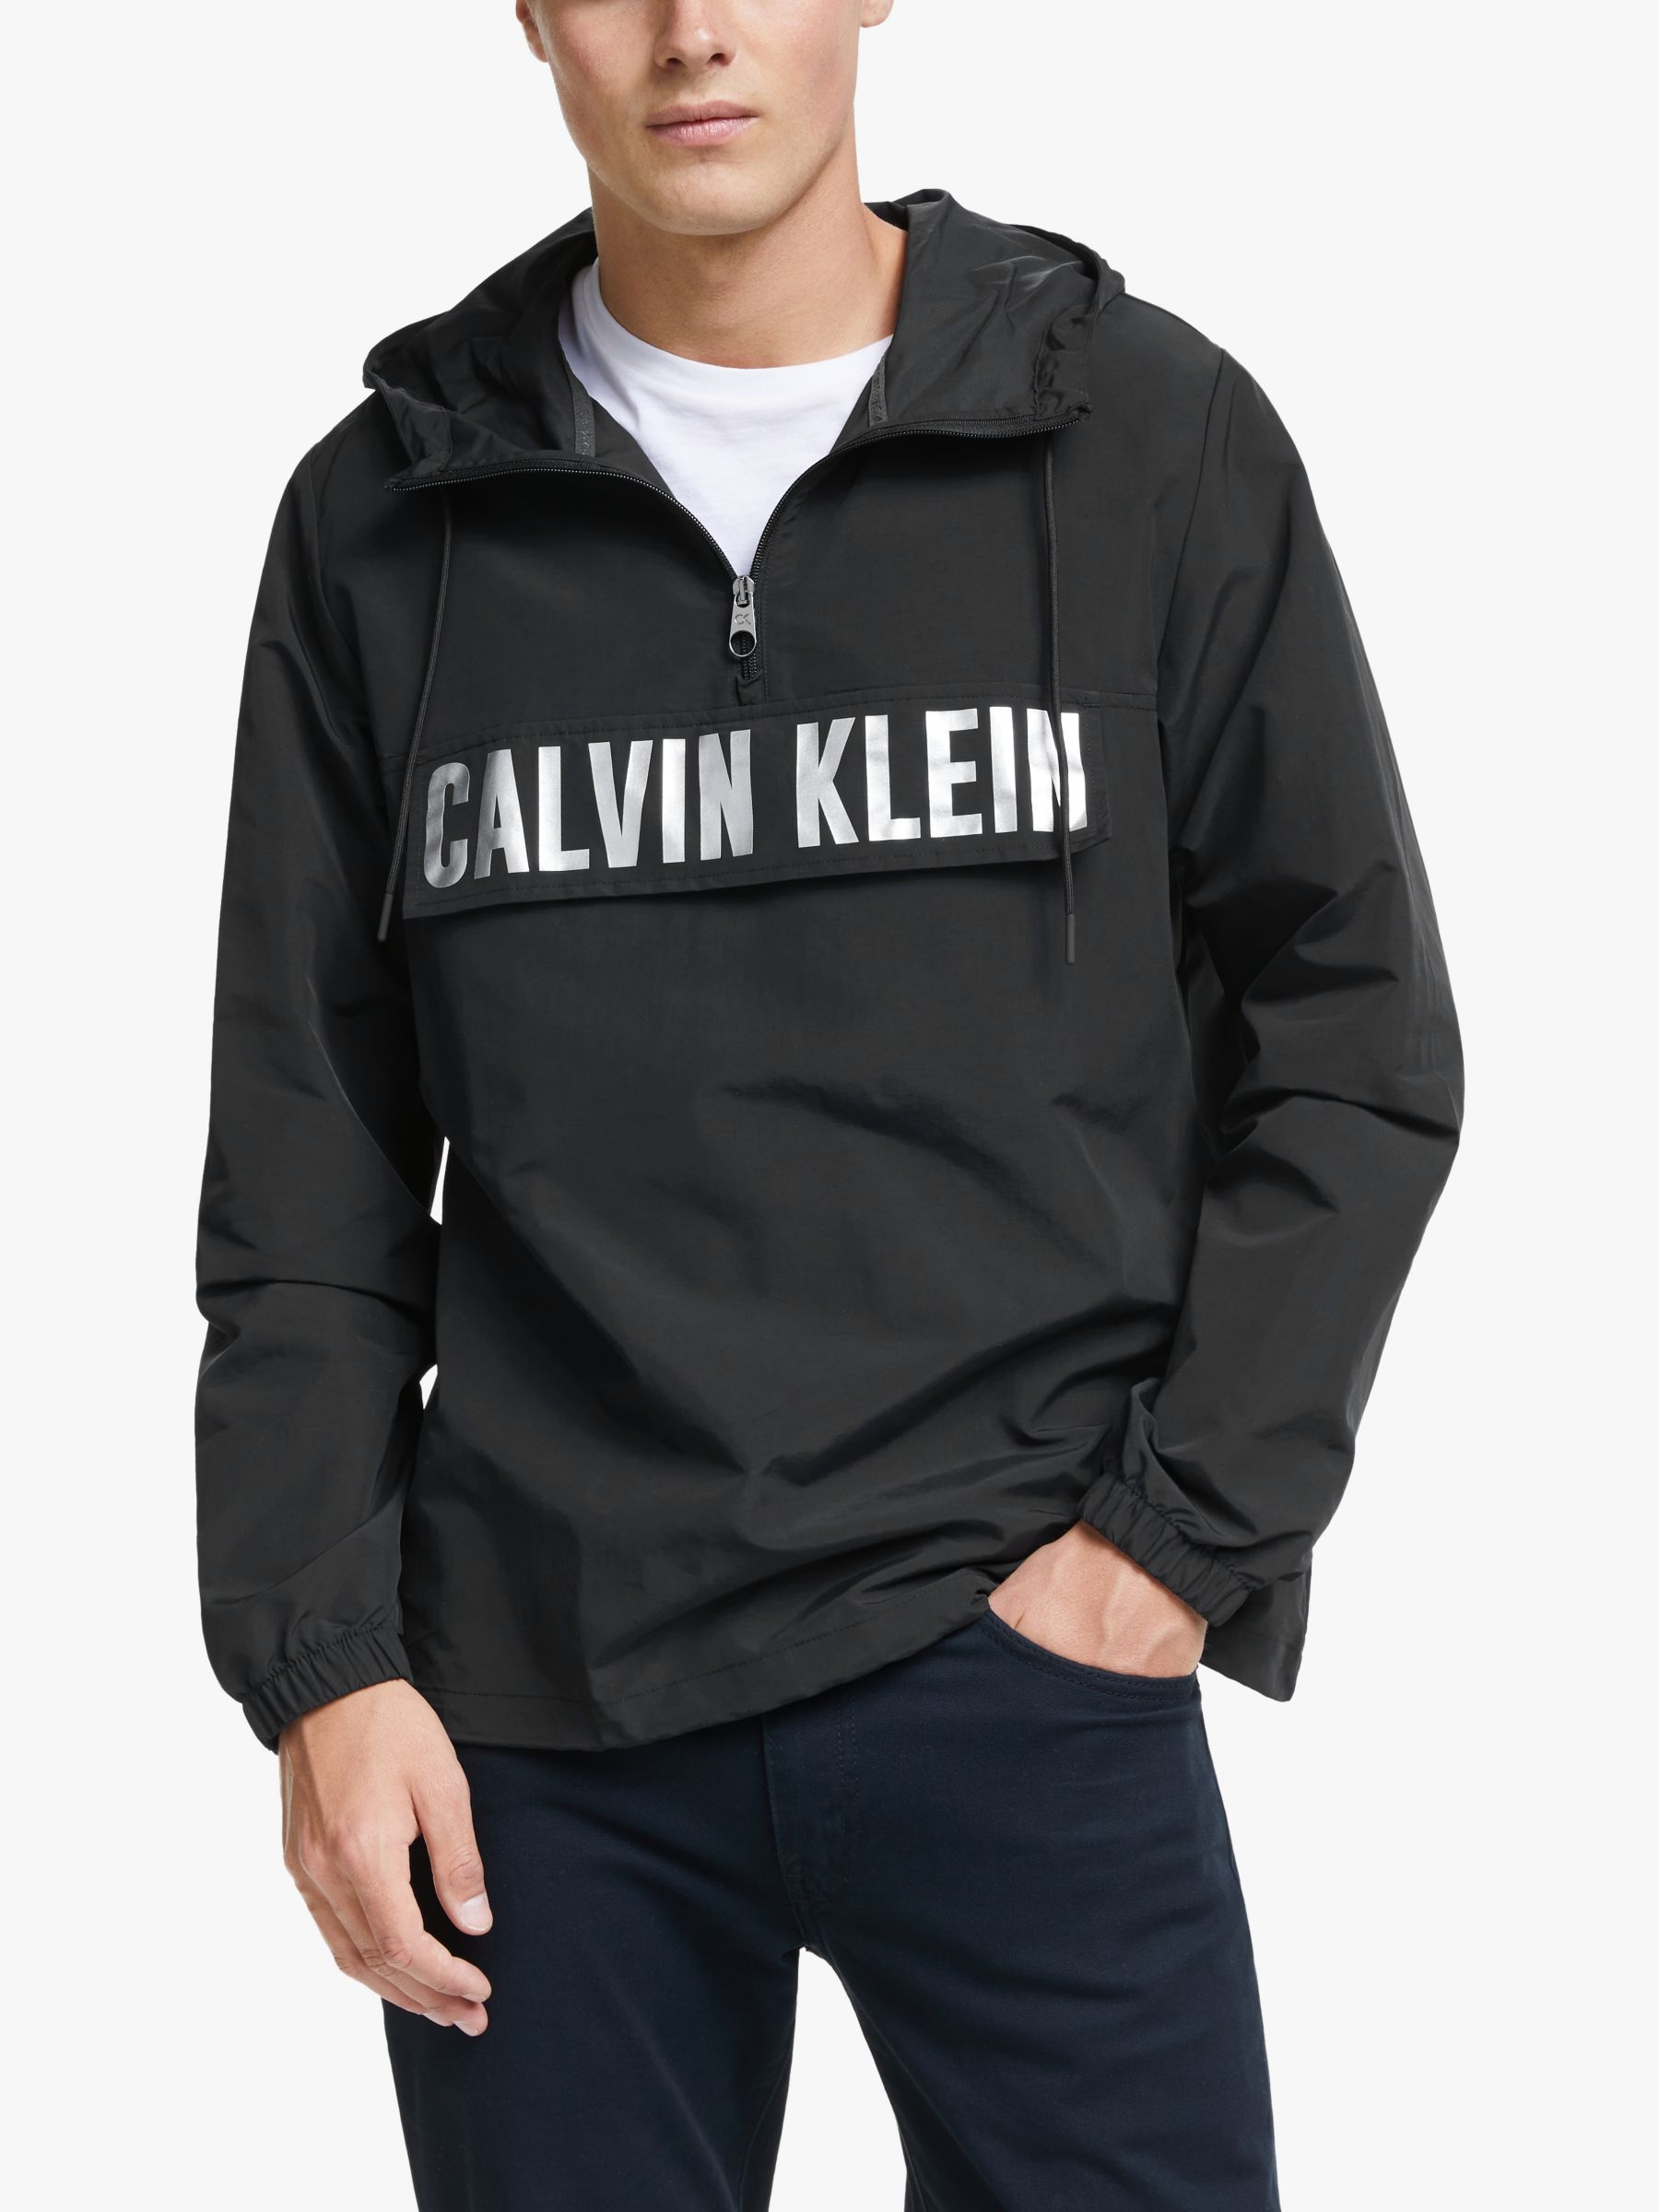  klein performance repel jacket , Off 63%,